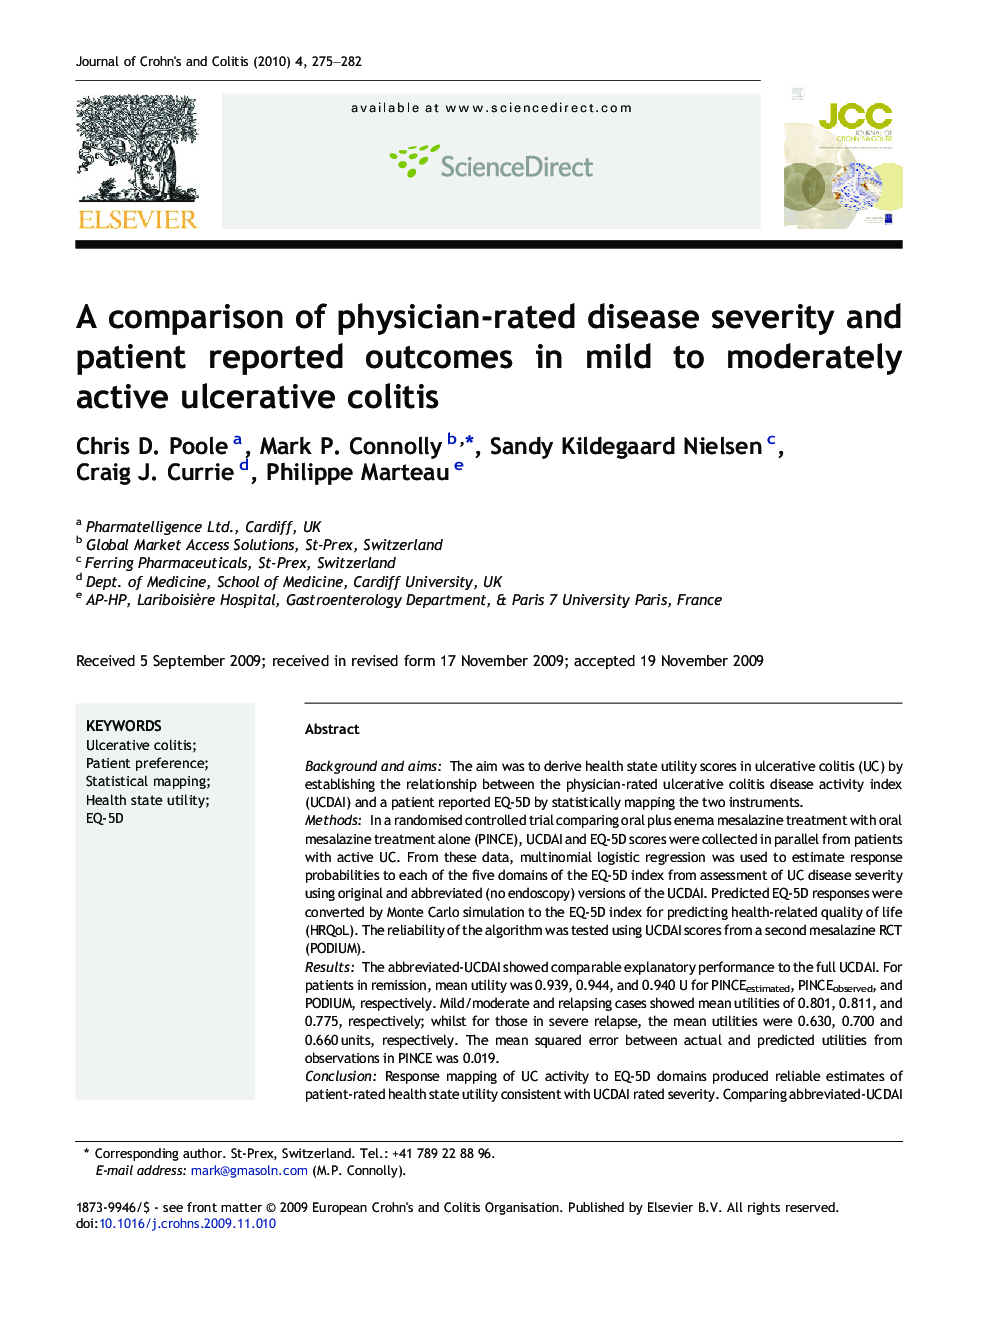 A comparison of physician-rated disease severity and patient reported outcomes in mild to moderately active ulcerative colitis